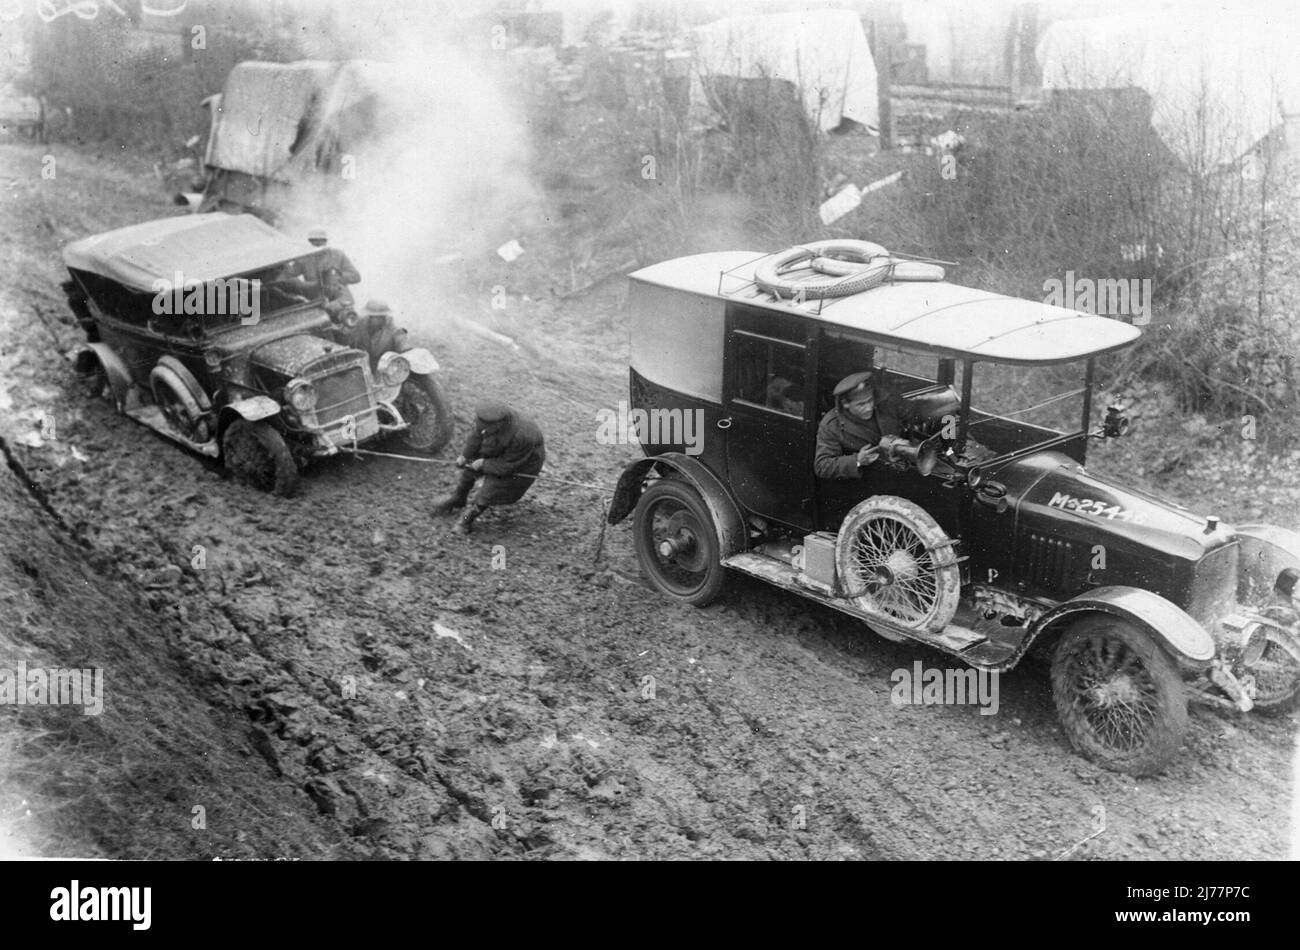 British Army motor car, M-25446, (Vauxhall 25 limousine) towing anpther (possible a Daimler Twenty) out of the mud at Hamel, January 1917. Stock Photo